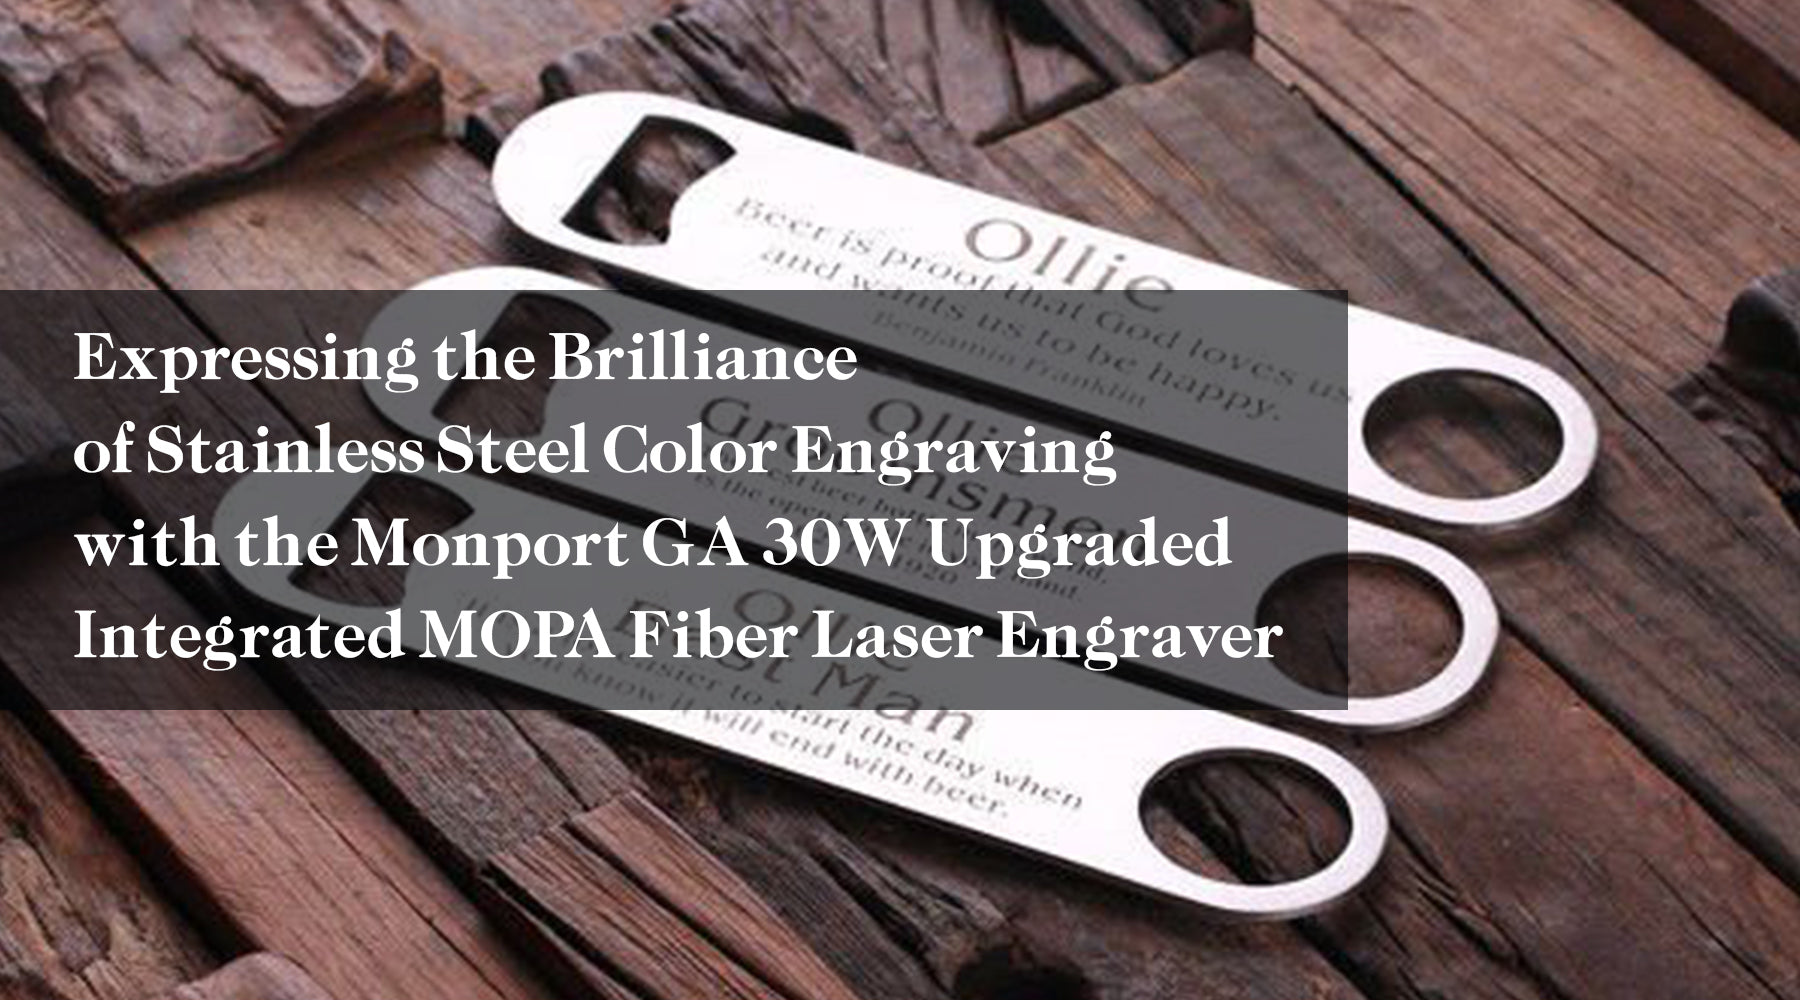 Expressing the Brilliance of Stainless Steel Color Engraving with the Monport GA 30W Upgraded Integrated MOPA Fiber Laser Engraver